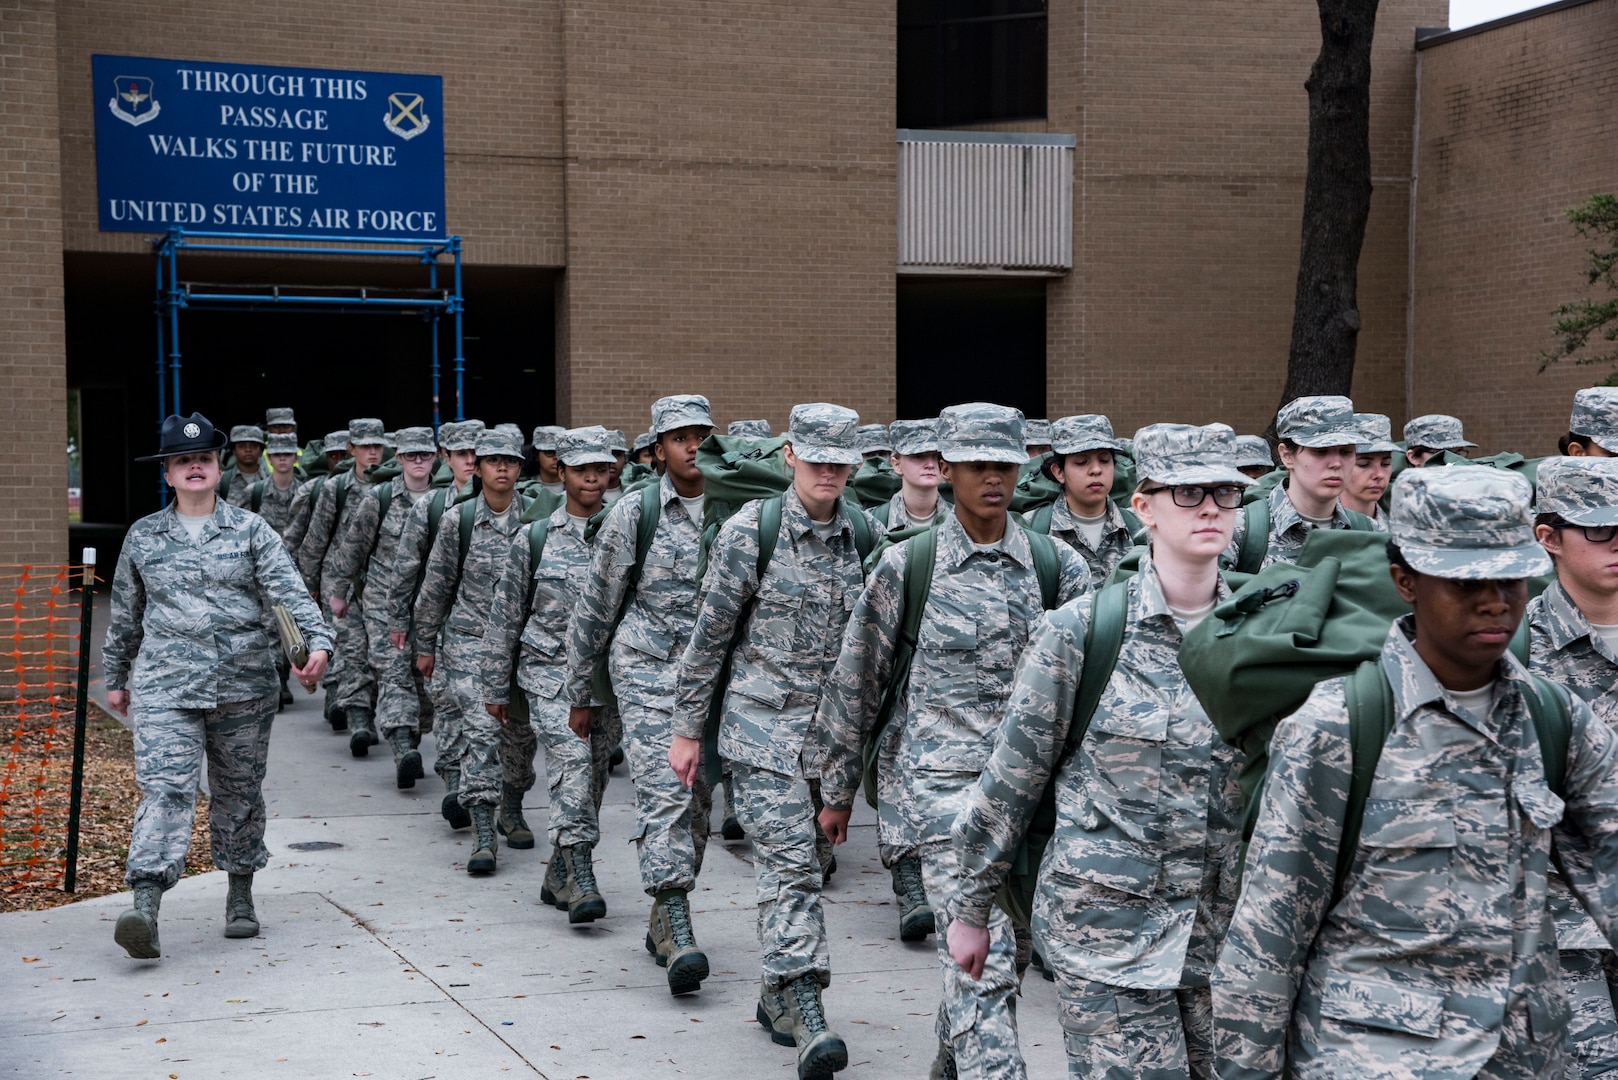 Trainees leave initial clothing issue with their first sets of uniforms May 1, 2019, at Joint Base San Antonio-Lackland, Texas. Between 300 and 400 trainees receive their first sets of uniforms weekly from initial clothing issue. (U.S. Air Force photo by Senior Airman Stormy Archer)